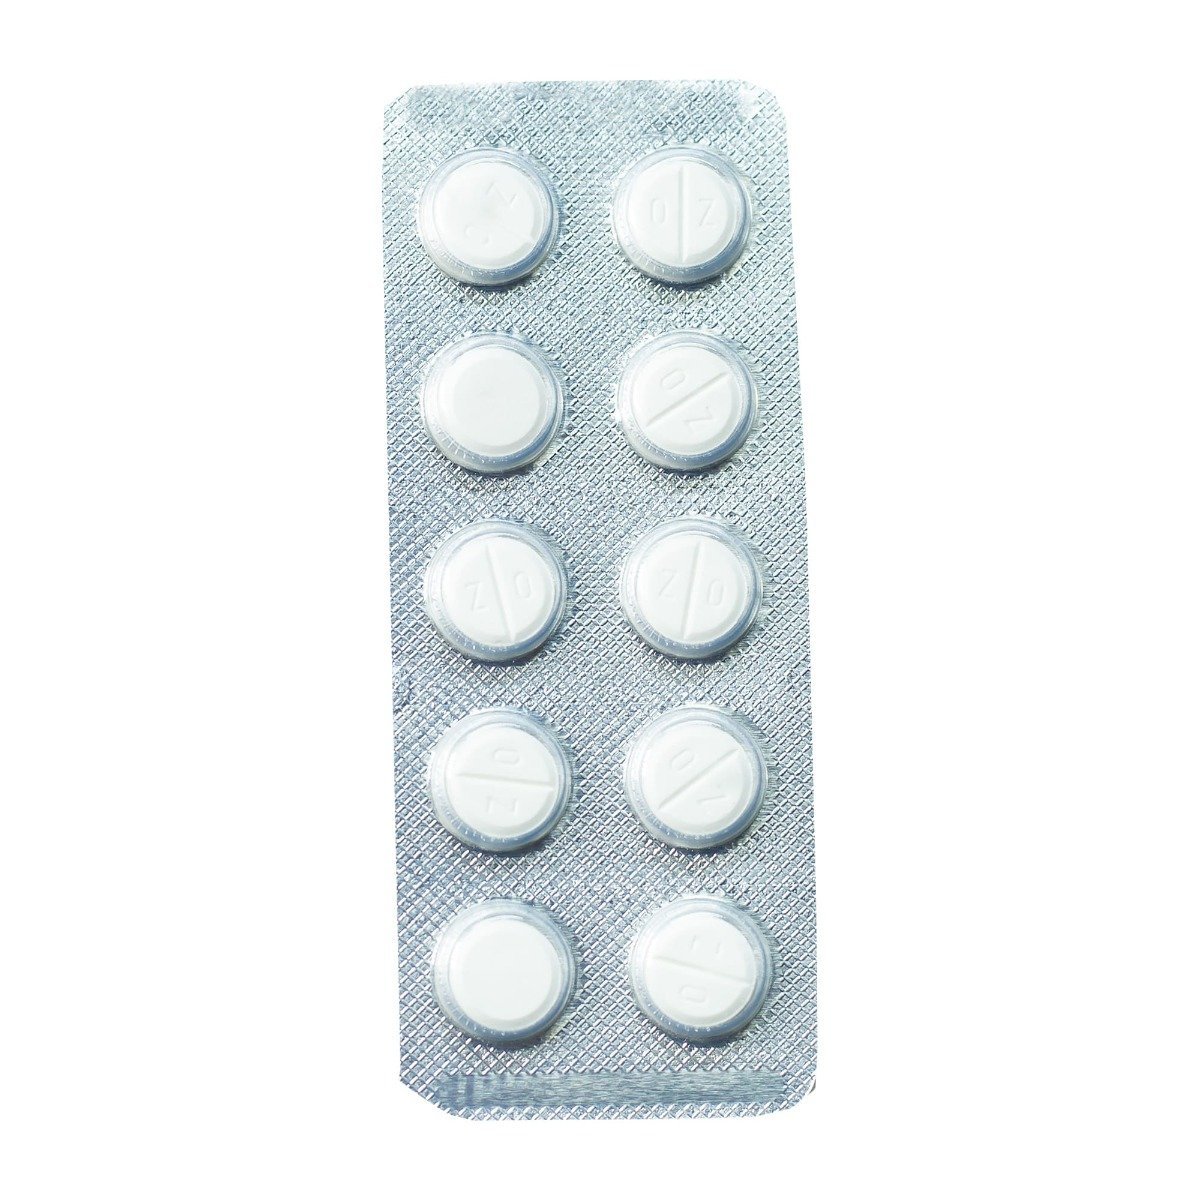 Sirdalud 2 mg - 20 Tablets - Bloom Pharmacy